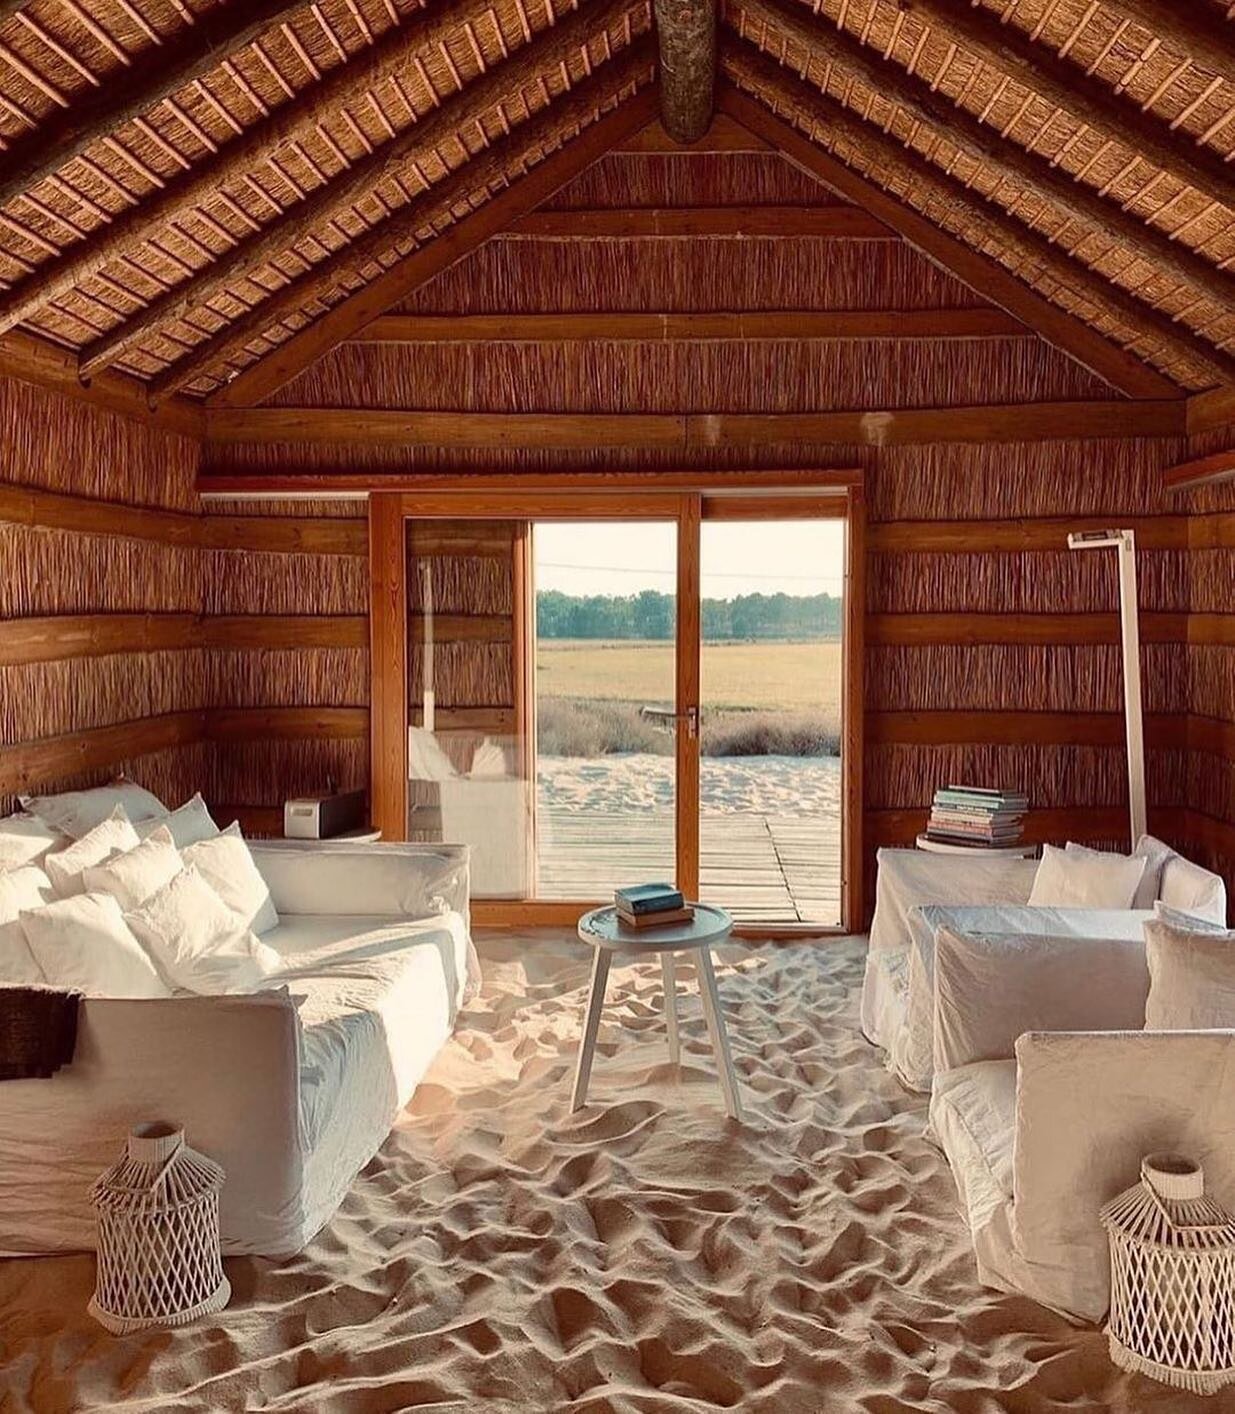 Welcome to @casasnaareia, a collection of houses in Portugal&rsquo;s sunny Comporta taking indoor/outdoor living to a new level with sand floors #wetraveledwhere